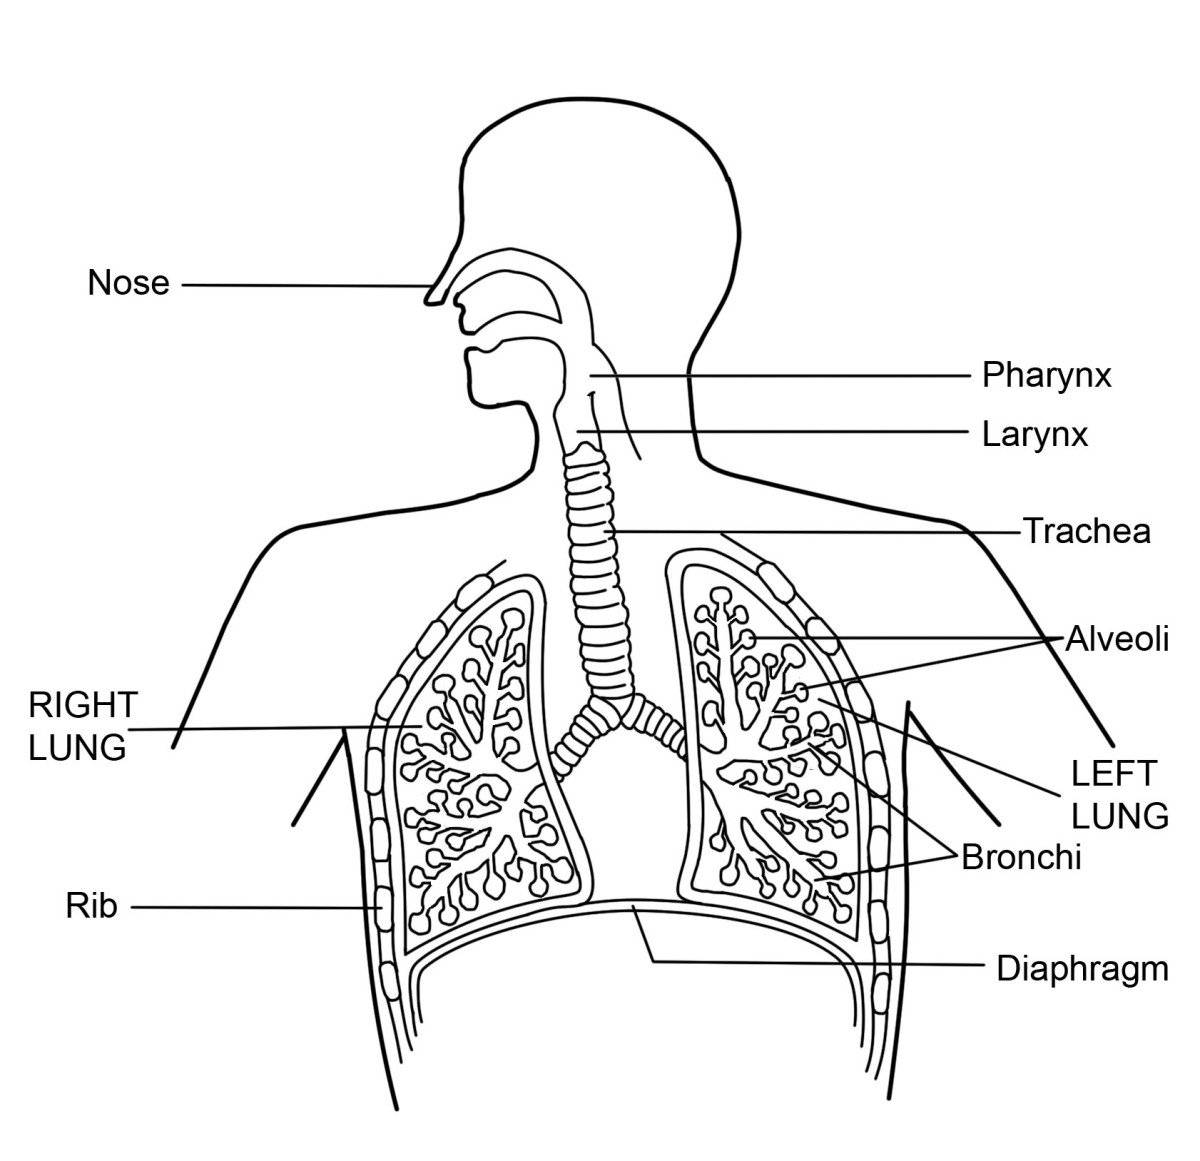 Thirty Surprising Facts about the Respiratory System | Owlcation